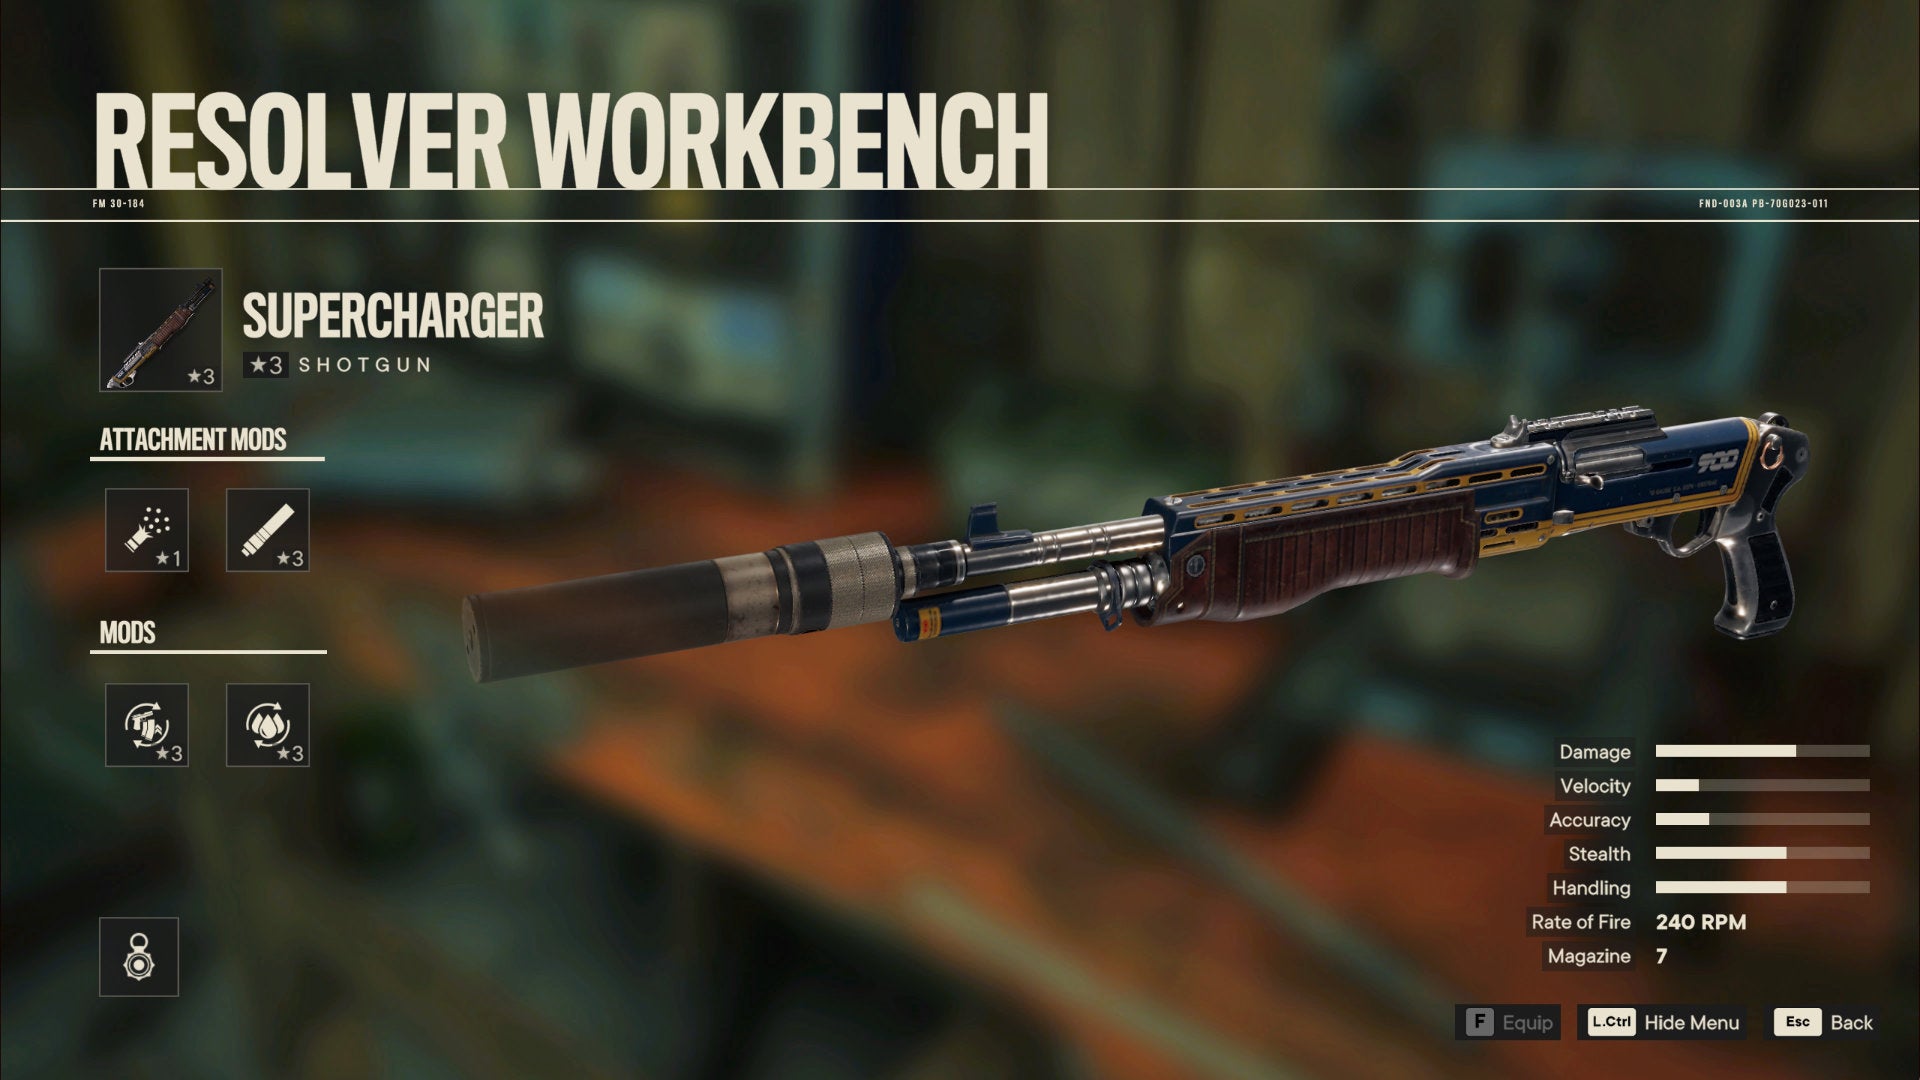 A screenshot of the Workbench screen in Far Cry 6 with Supercharger selected.